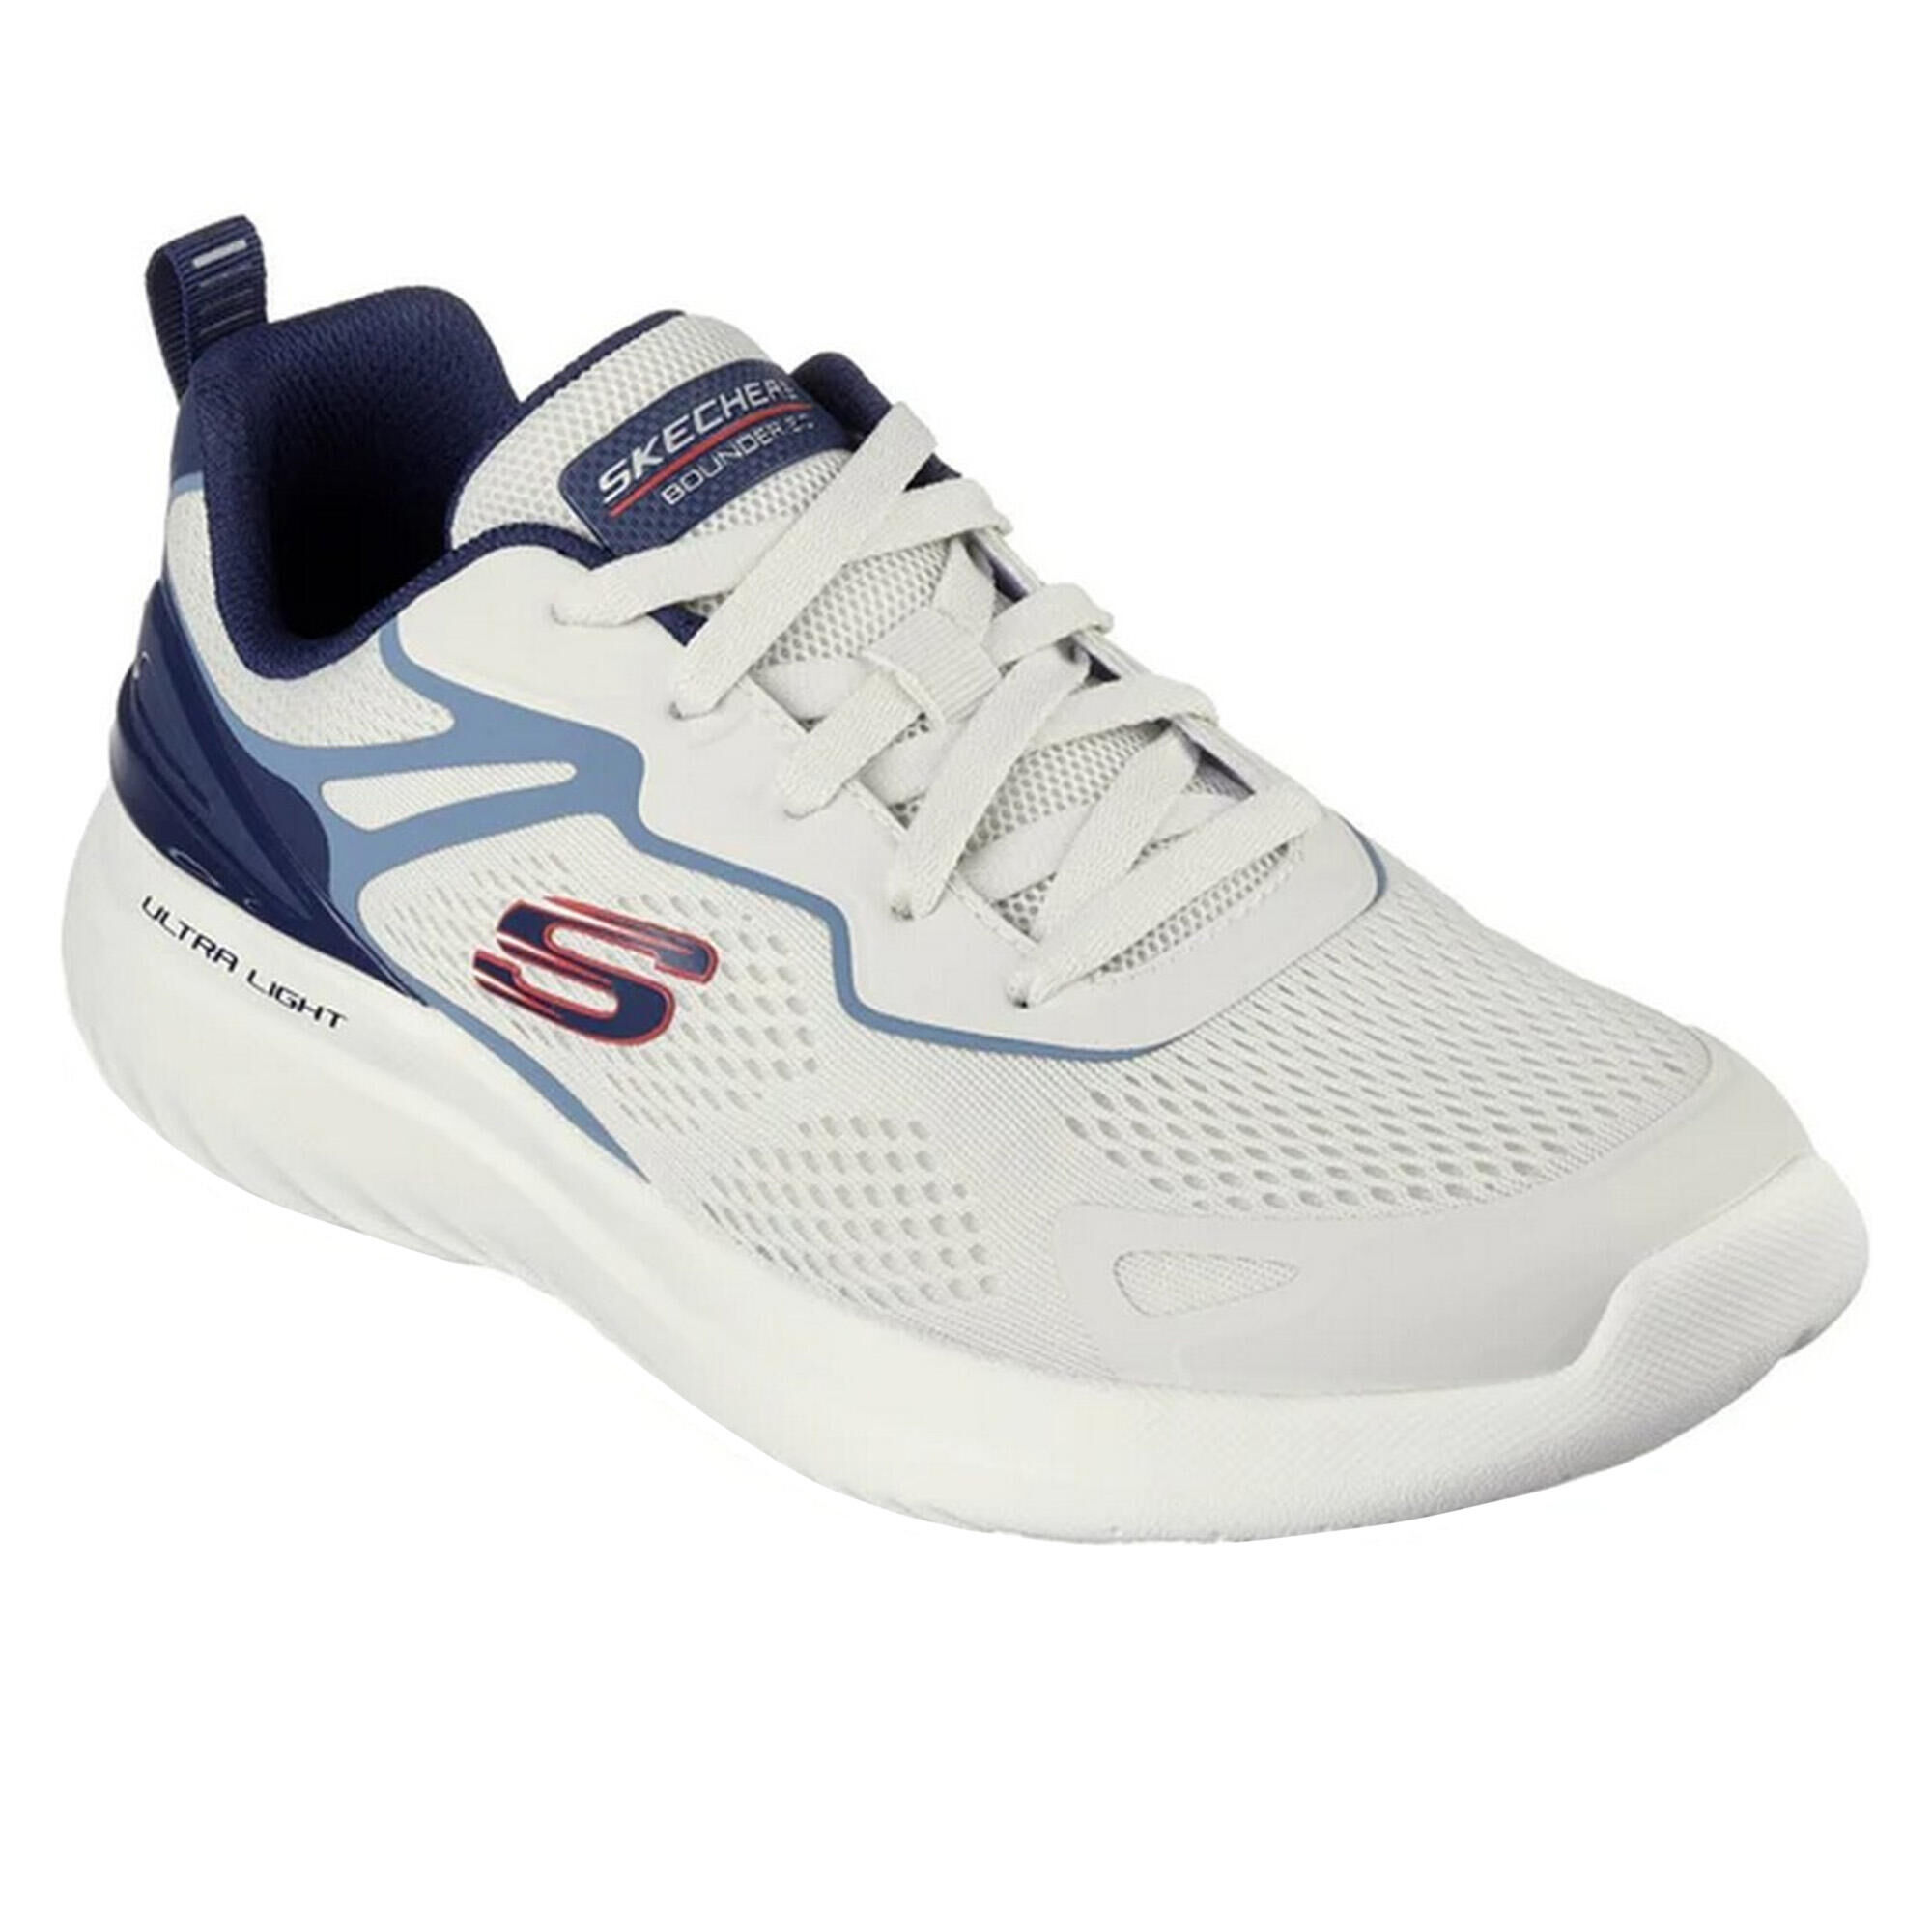 SKECHERS Mens Bounder 2.0 Andal Trainers (White/Navy)